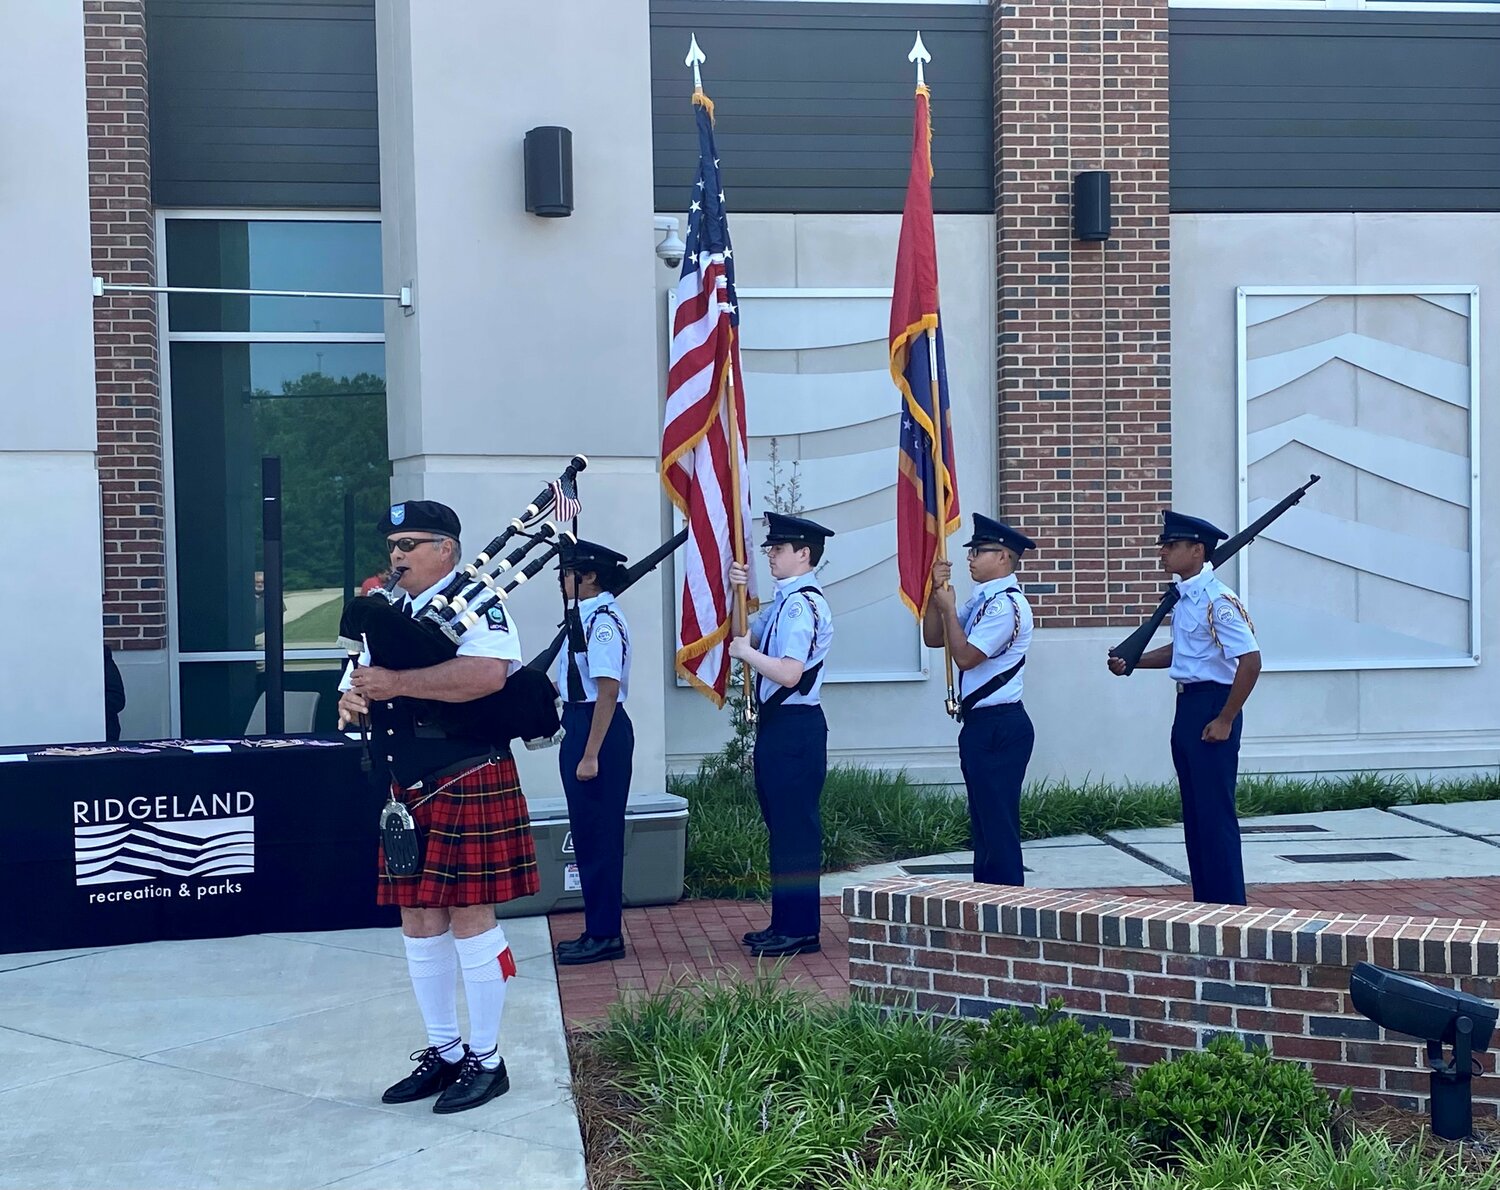 Pictured are the Ridgeland High School AFJROTC Color Guard presenting the flags.